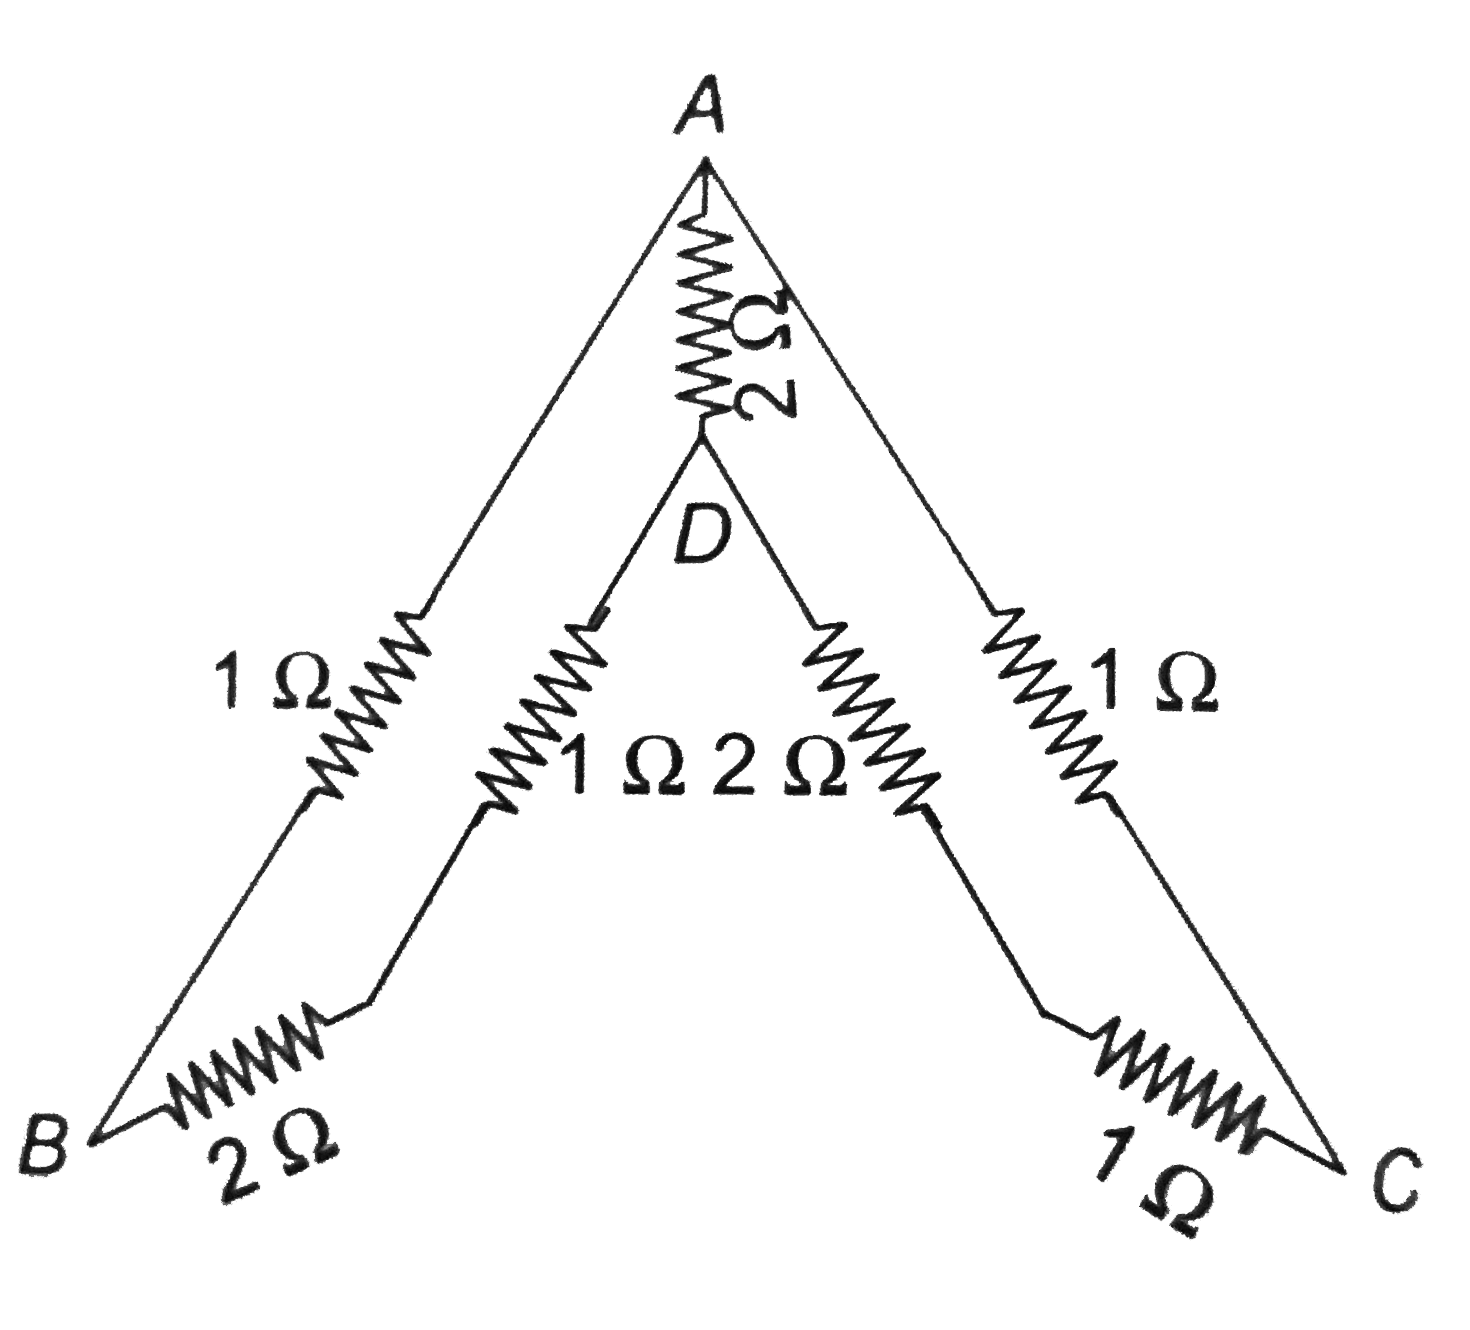 A network of nine conductors connects six points A, B, C, D, E and F as shown in fig. The figure denotes resistances in ohms. Find the equivalents resistance between A and D.